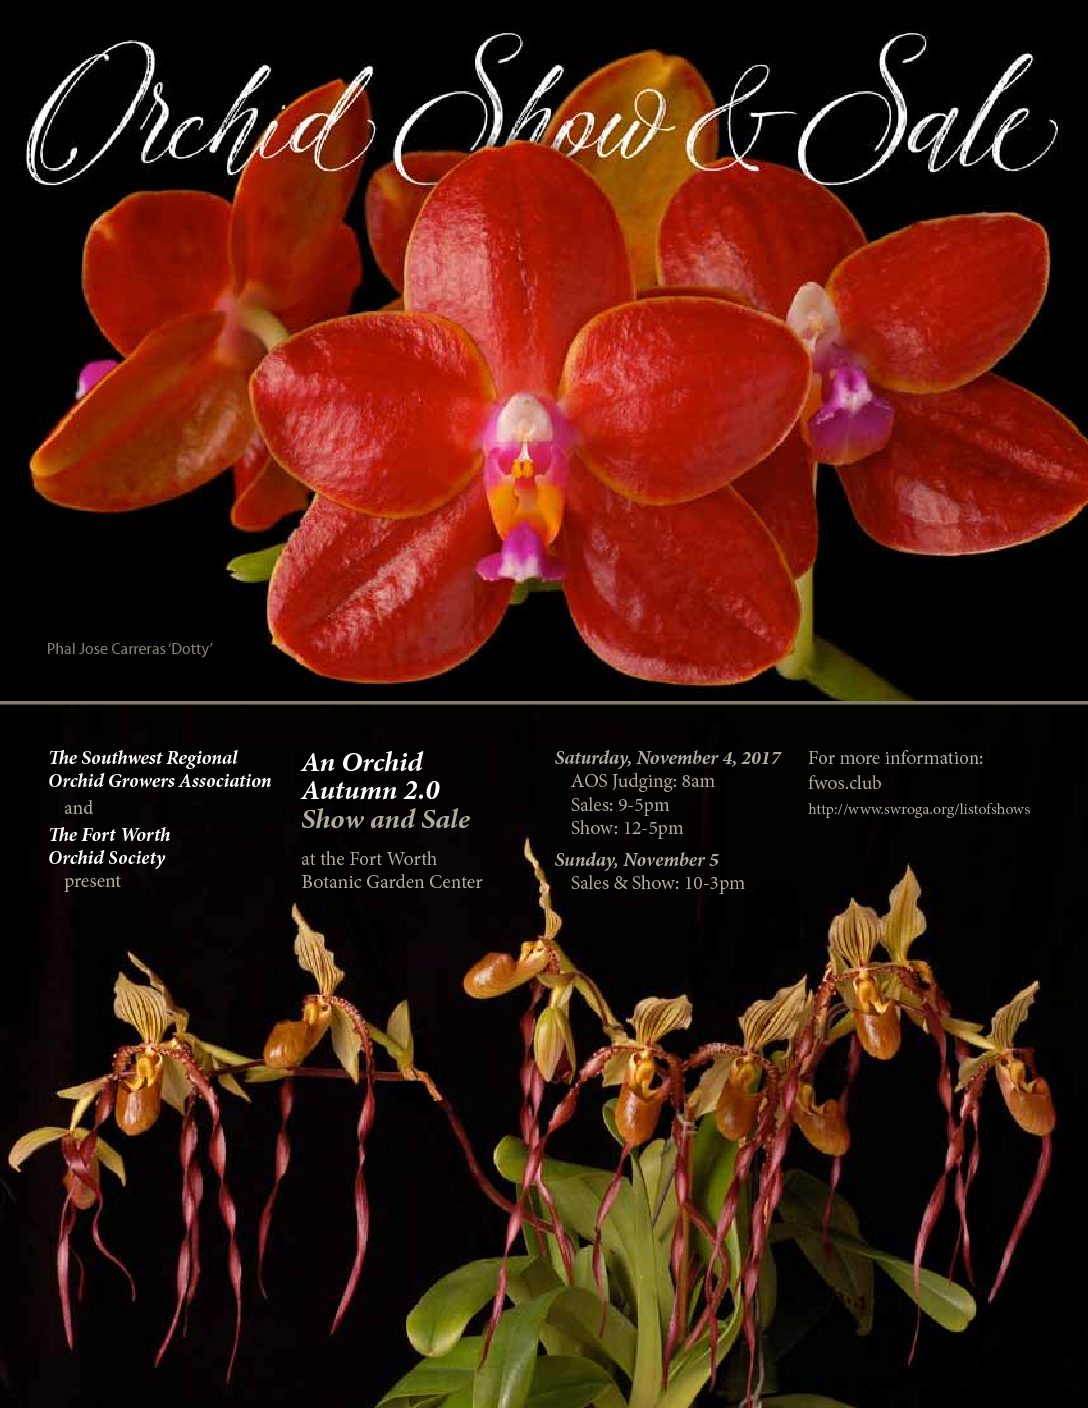 Baton Rouge Orchid Society's Show and Sale